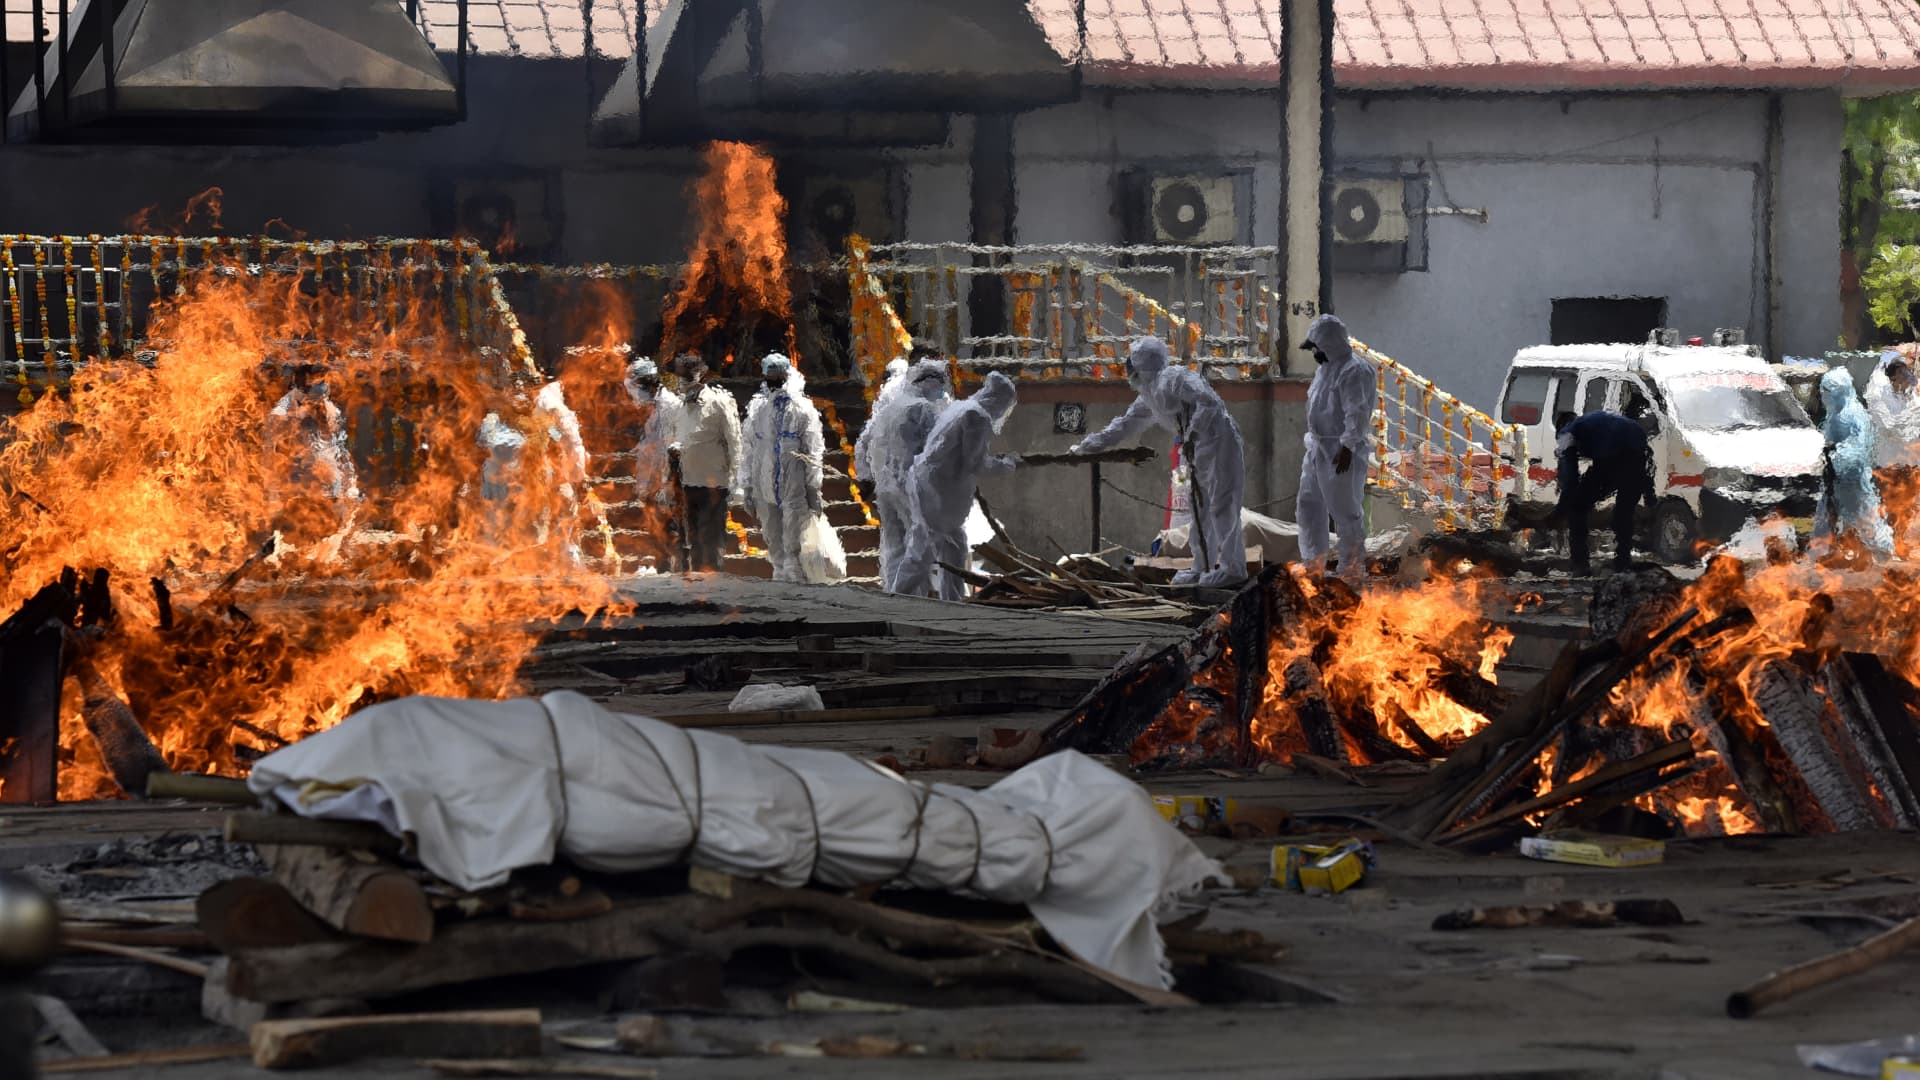 A view of multiple funeral pyres of Covid-19 victims, at Nigambodh Ghat crematorium, on April 23, 2021 in New Delhi, India.